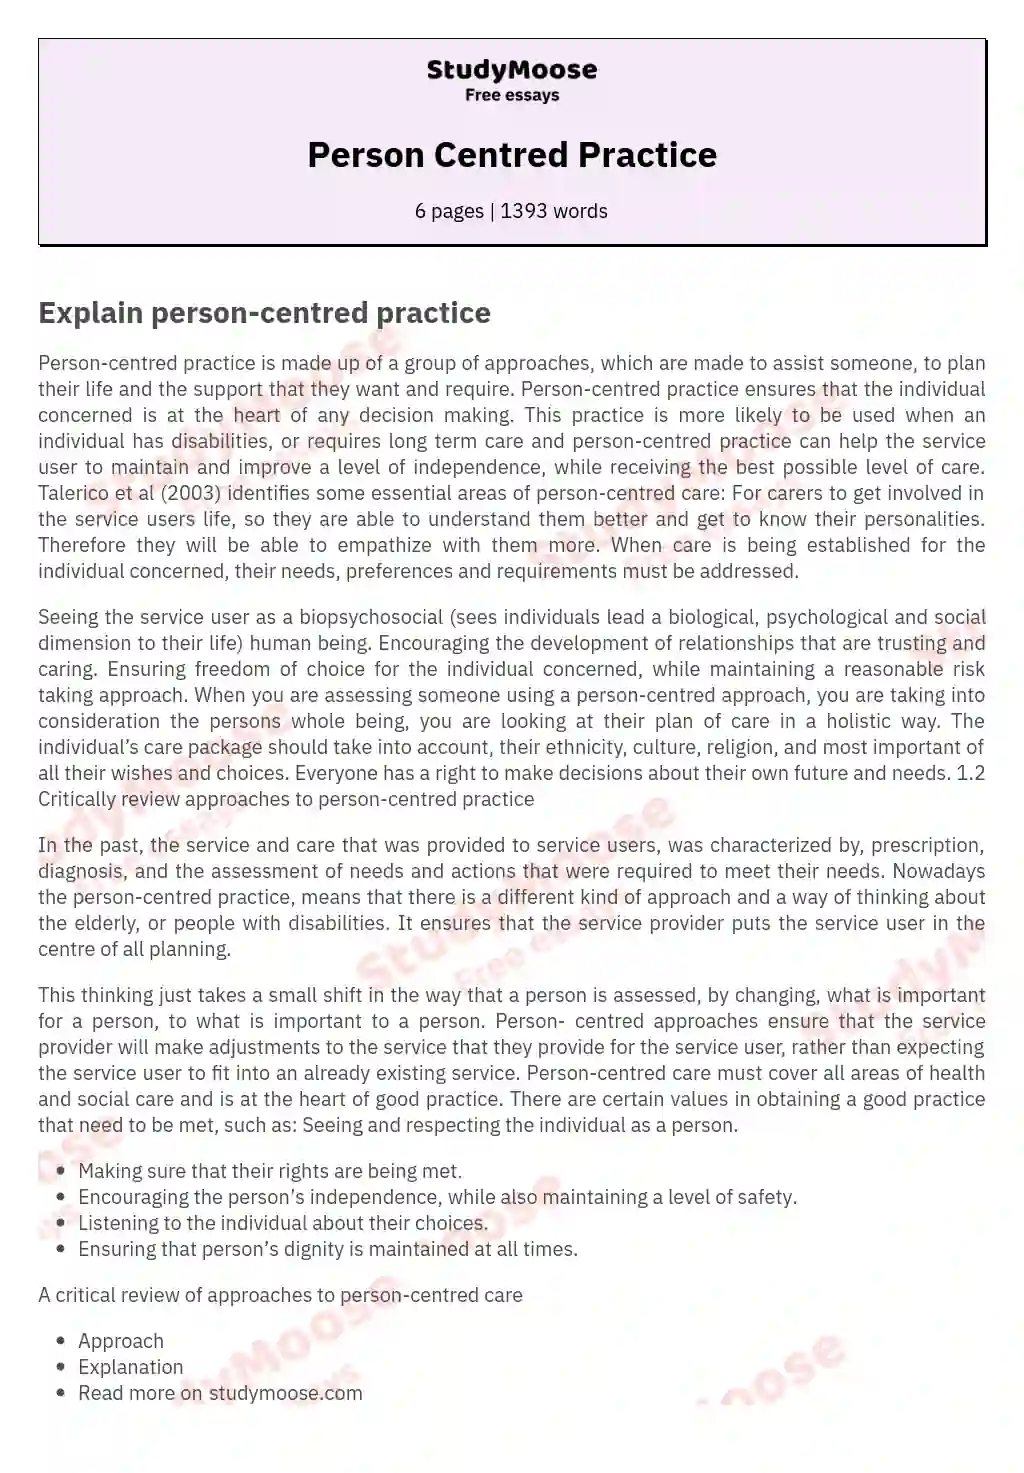 Person Centred Practice essay